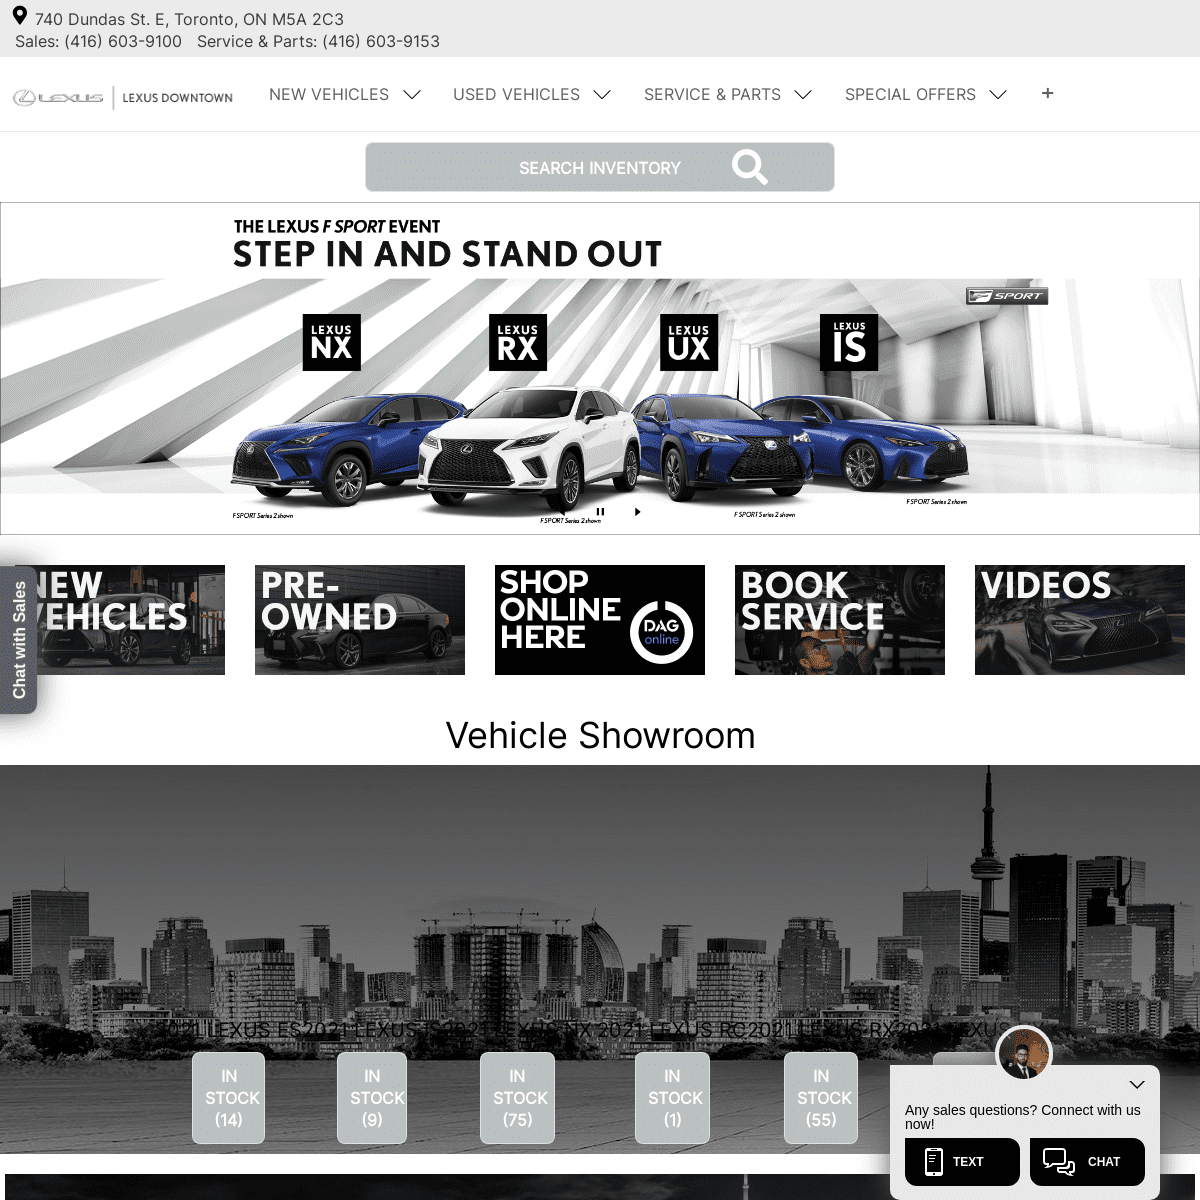 A complete backup of https://lexusdowntown.ca